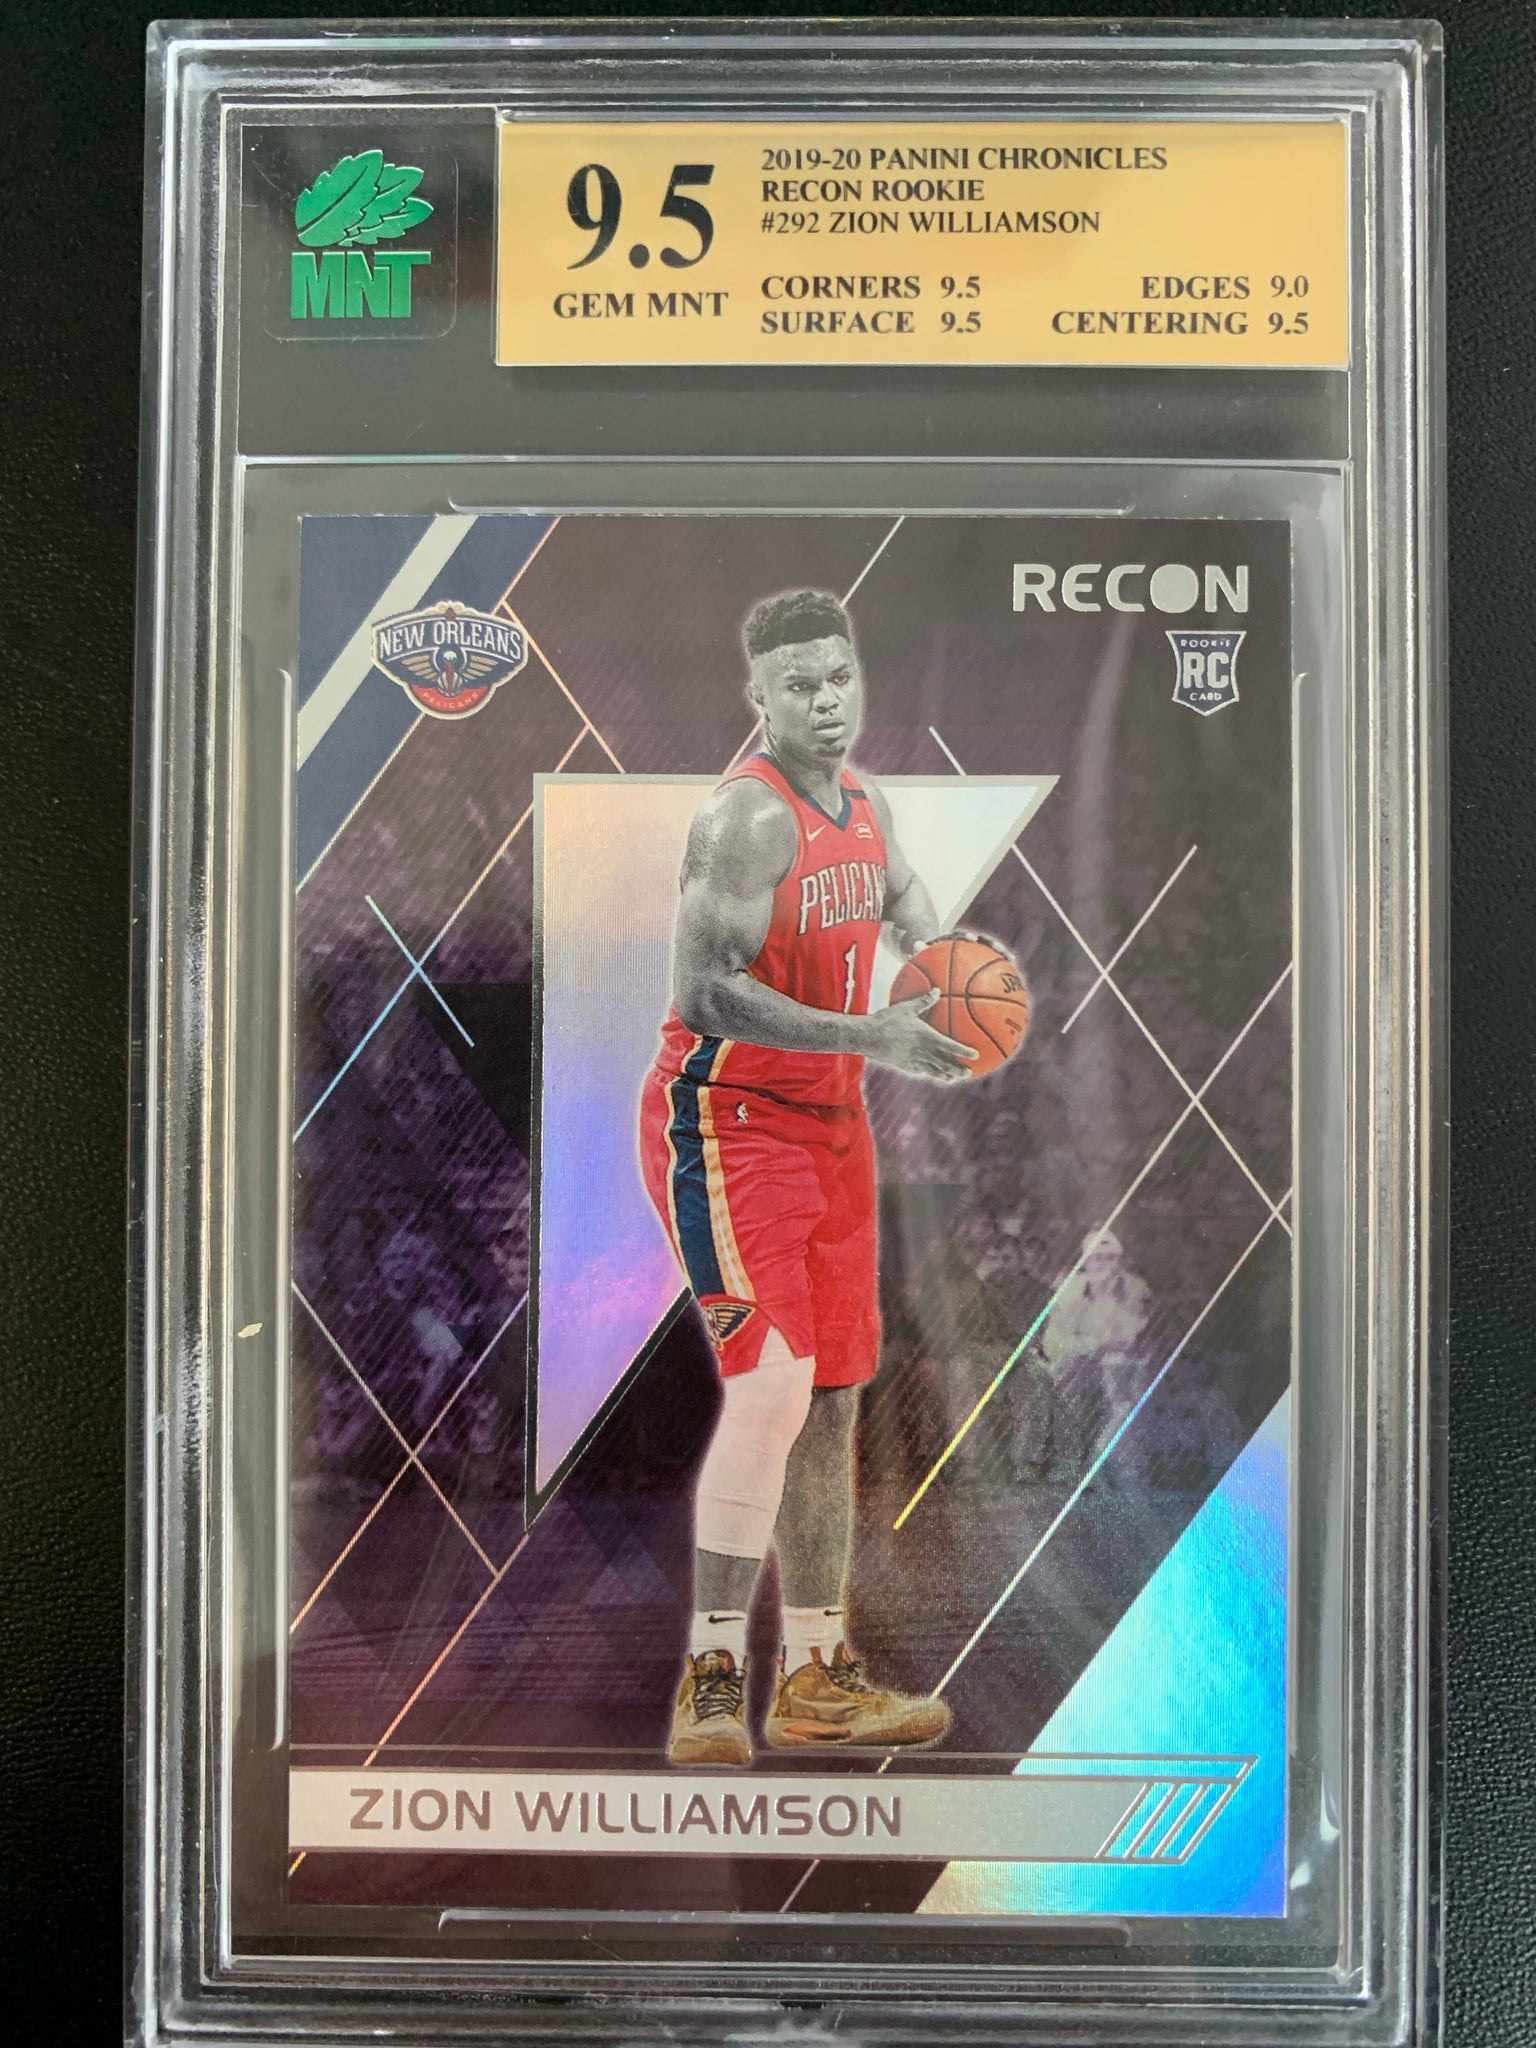 2019-2020 PANINI CHRONICLES BASKETBALL #292 NEW ORLEANS PELICANS - ZION WILLIAMSON RECON ROOKIE CARD GRADED MNT 9.5 GEM MINT